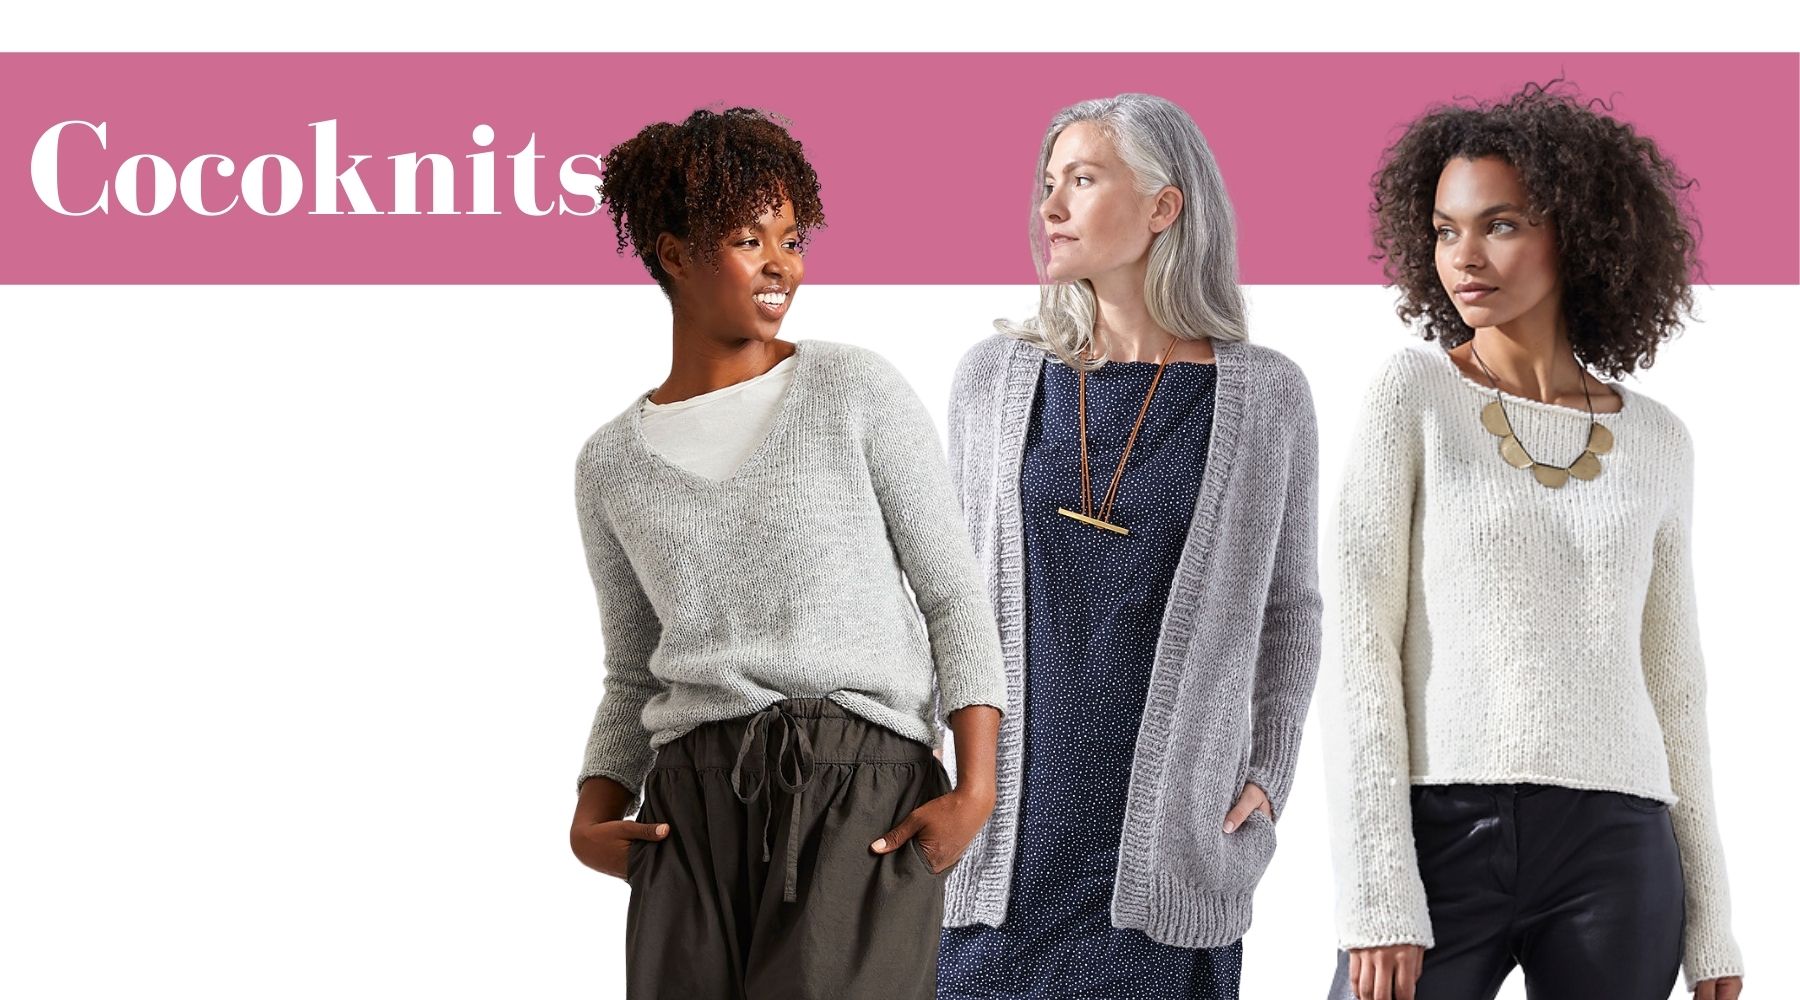 Seamed sweaters and seamless - it's like chocolate and vanilla